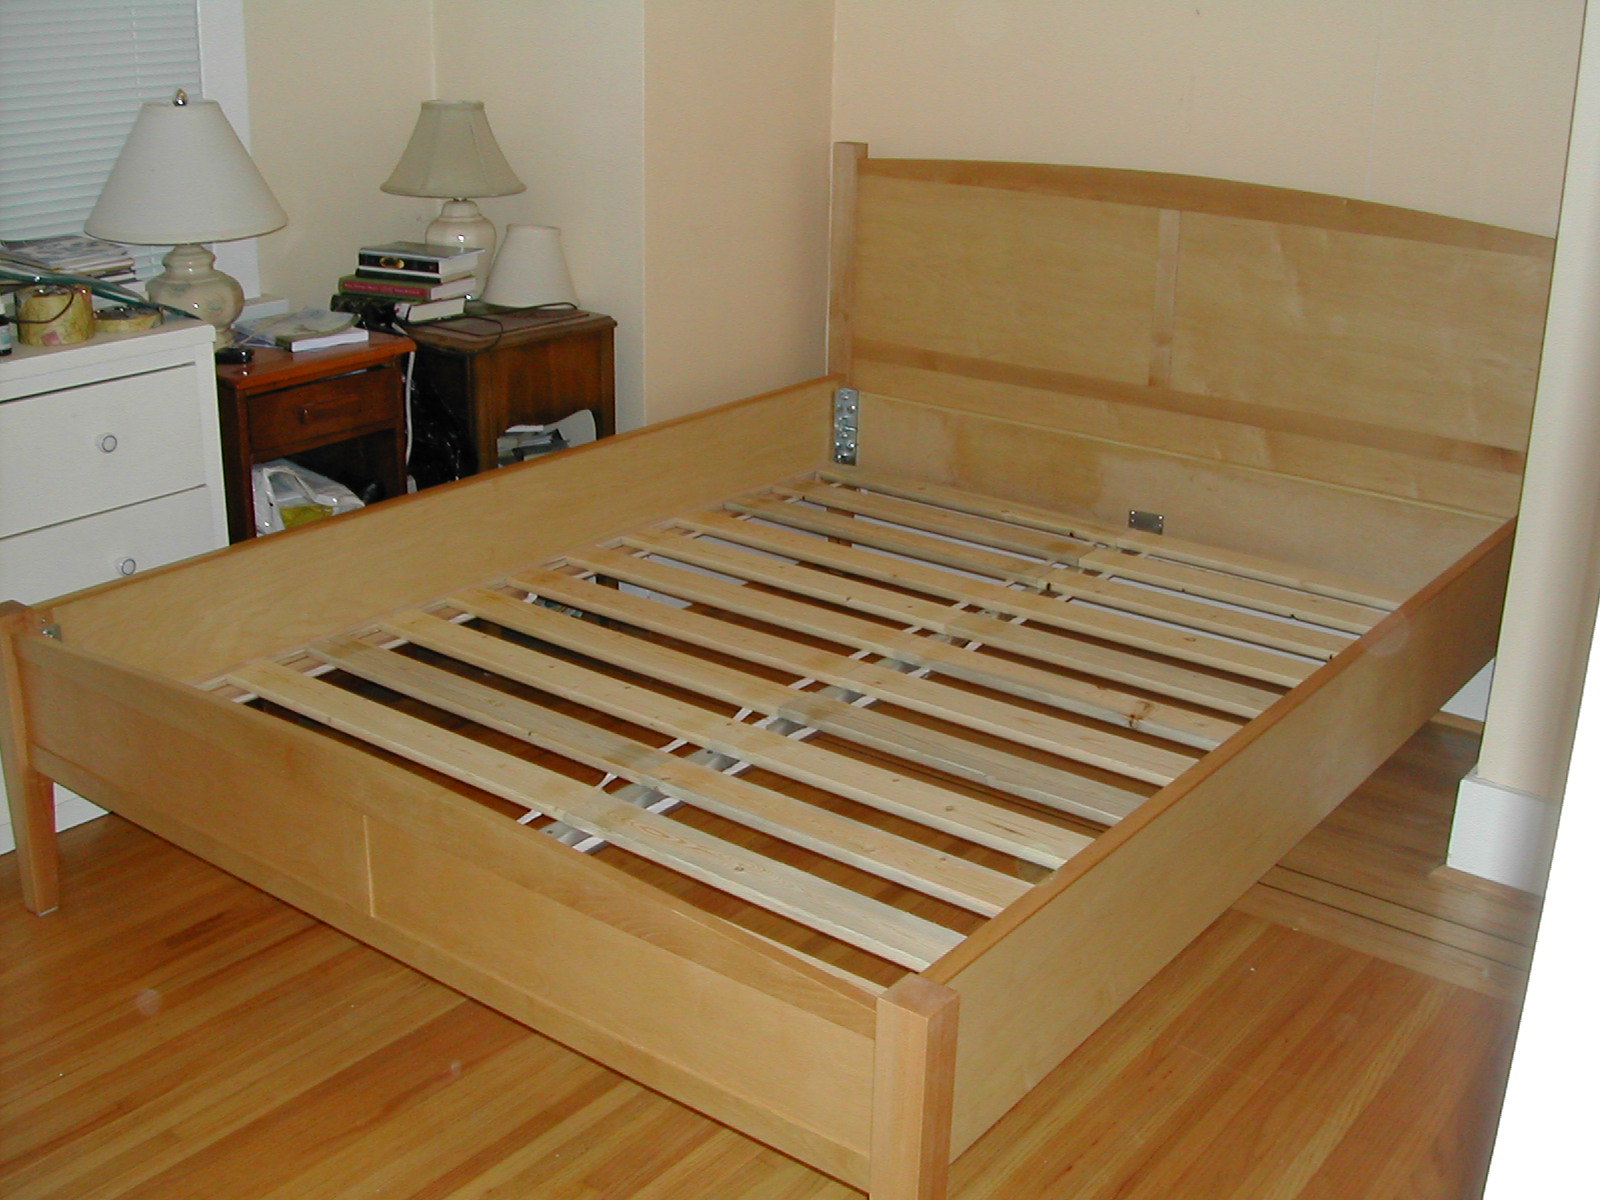 How to Take Apart a Bed: Simple Steps for Disassembly